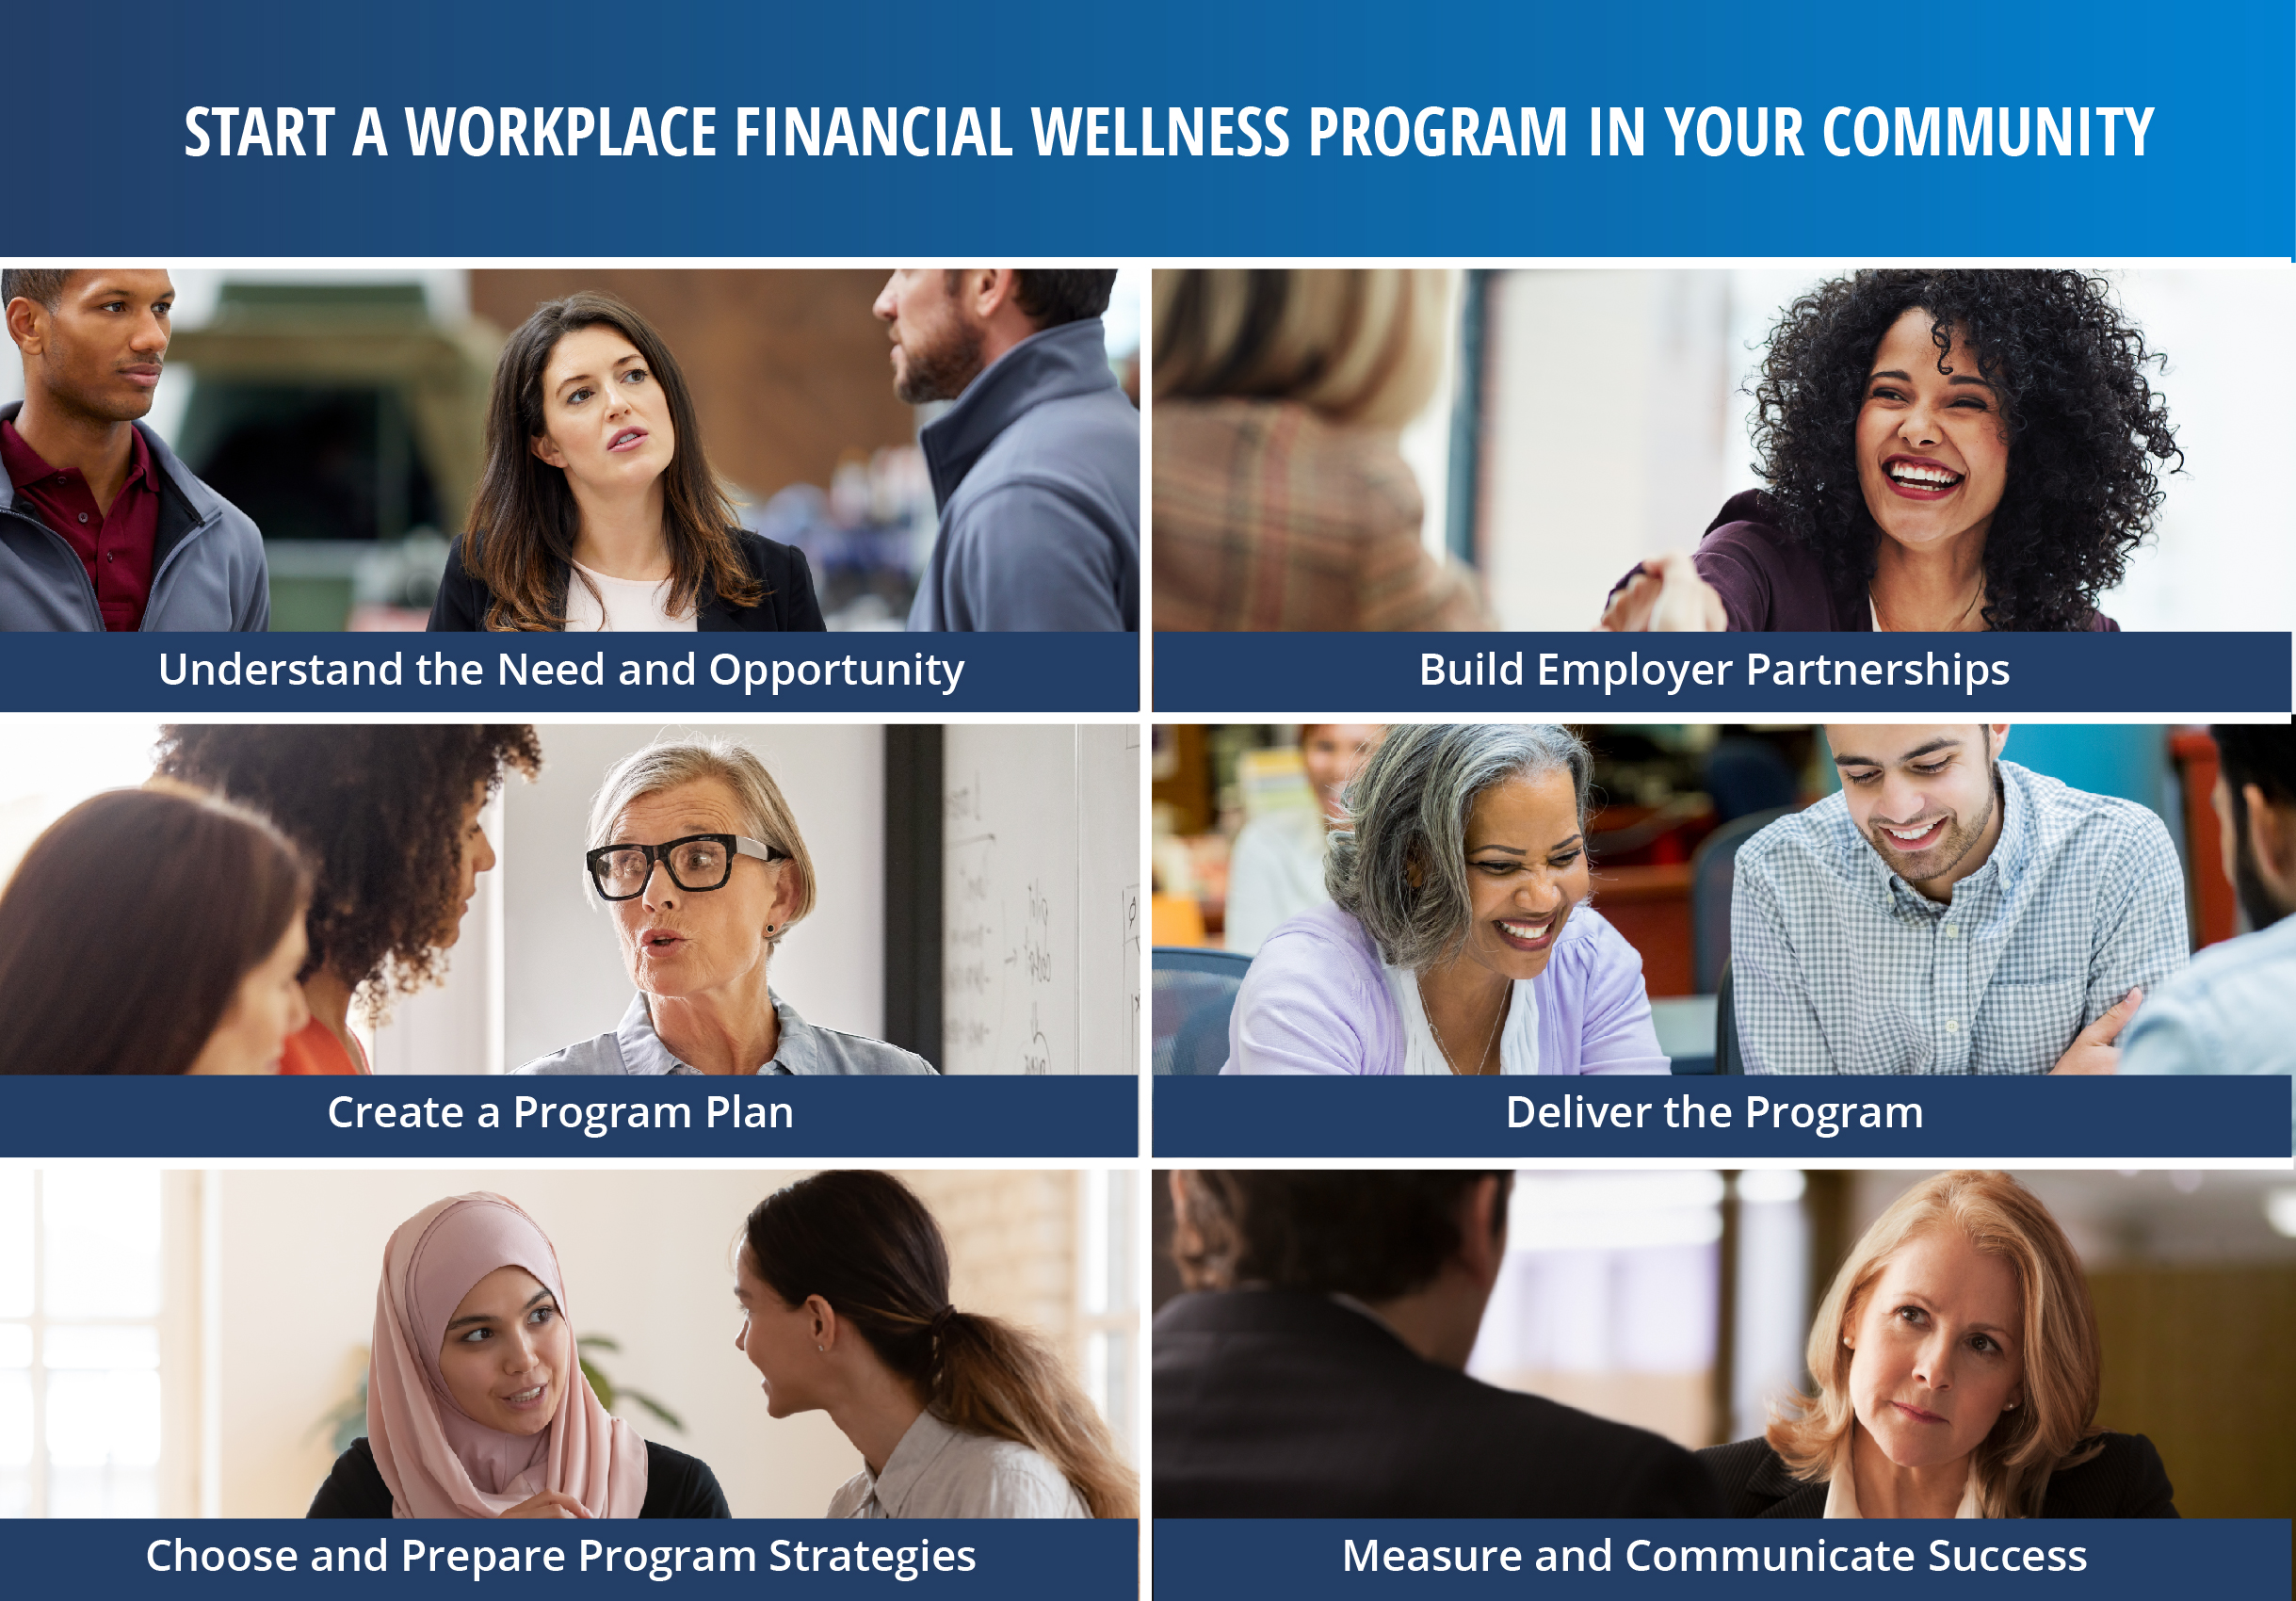 Start a Workplace Financial Wellness Program in Your Community